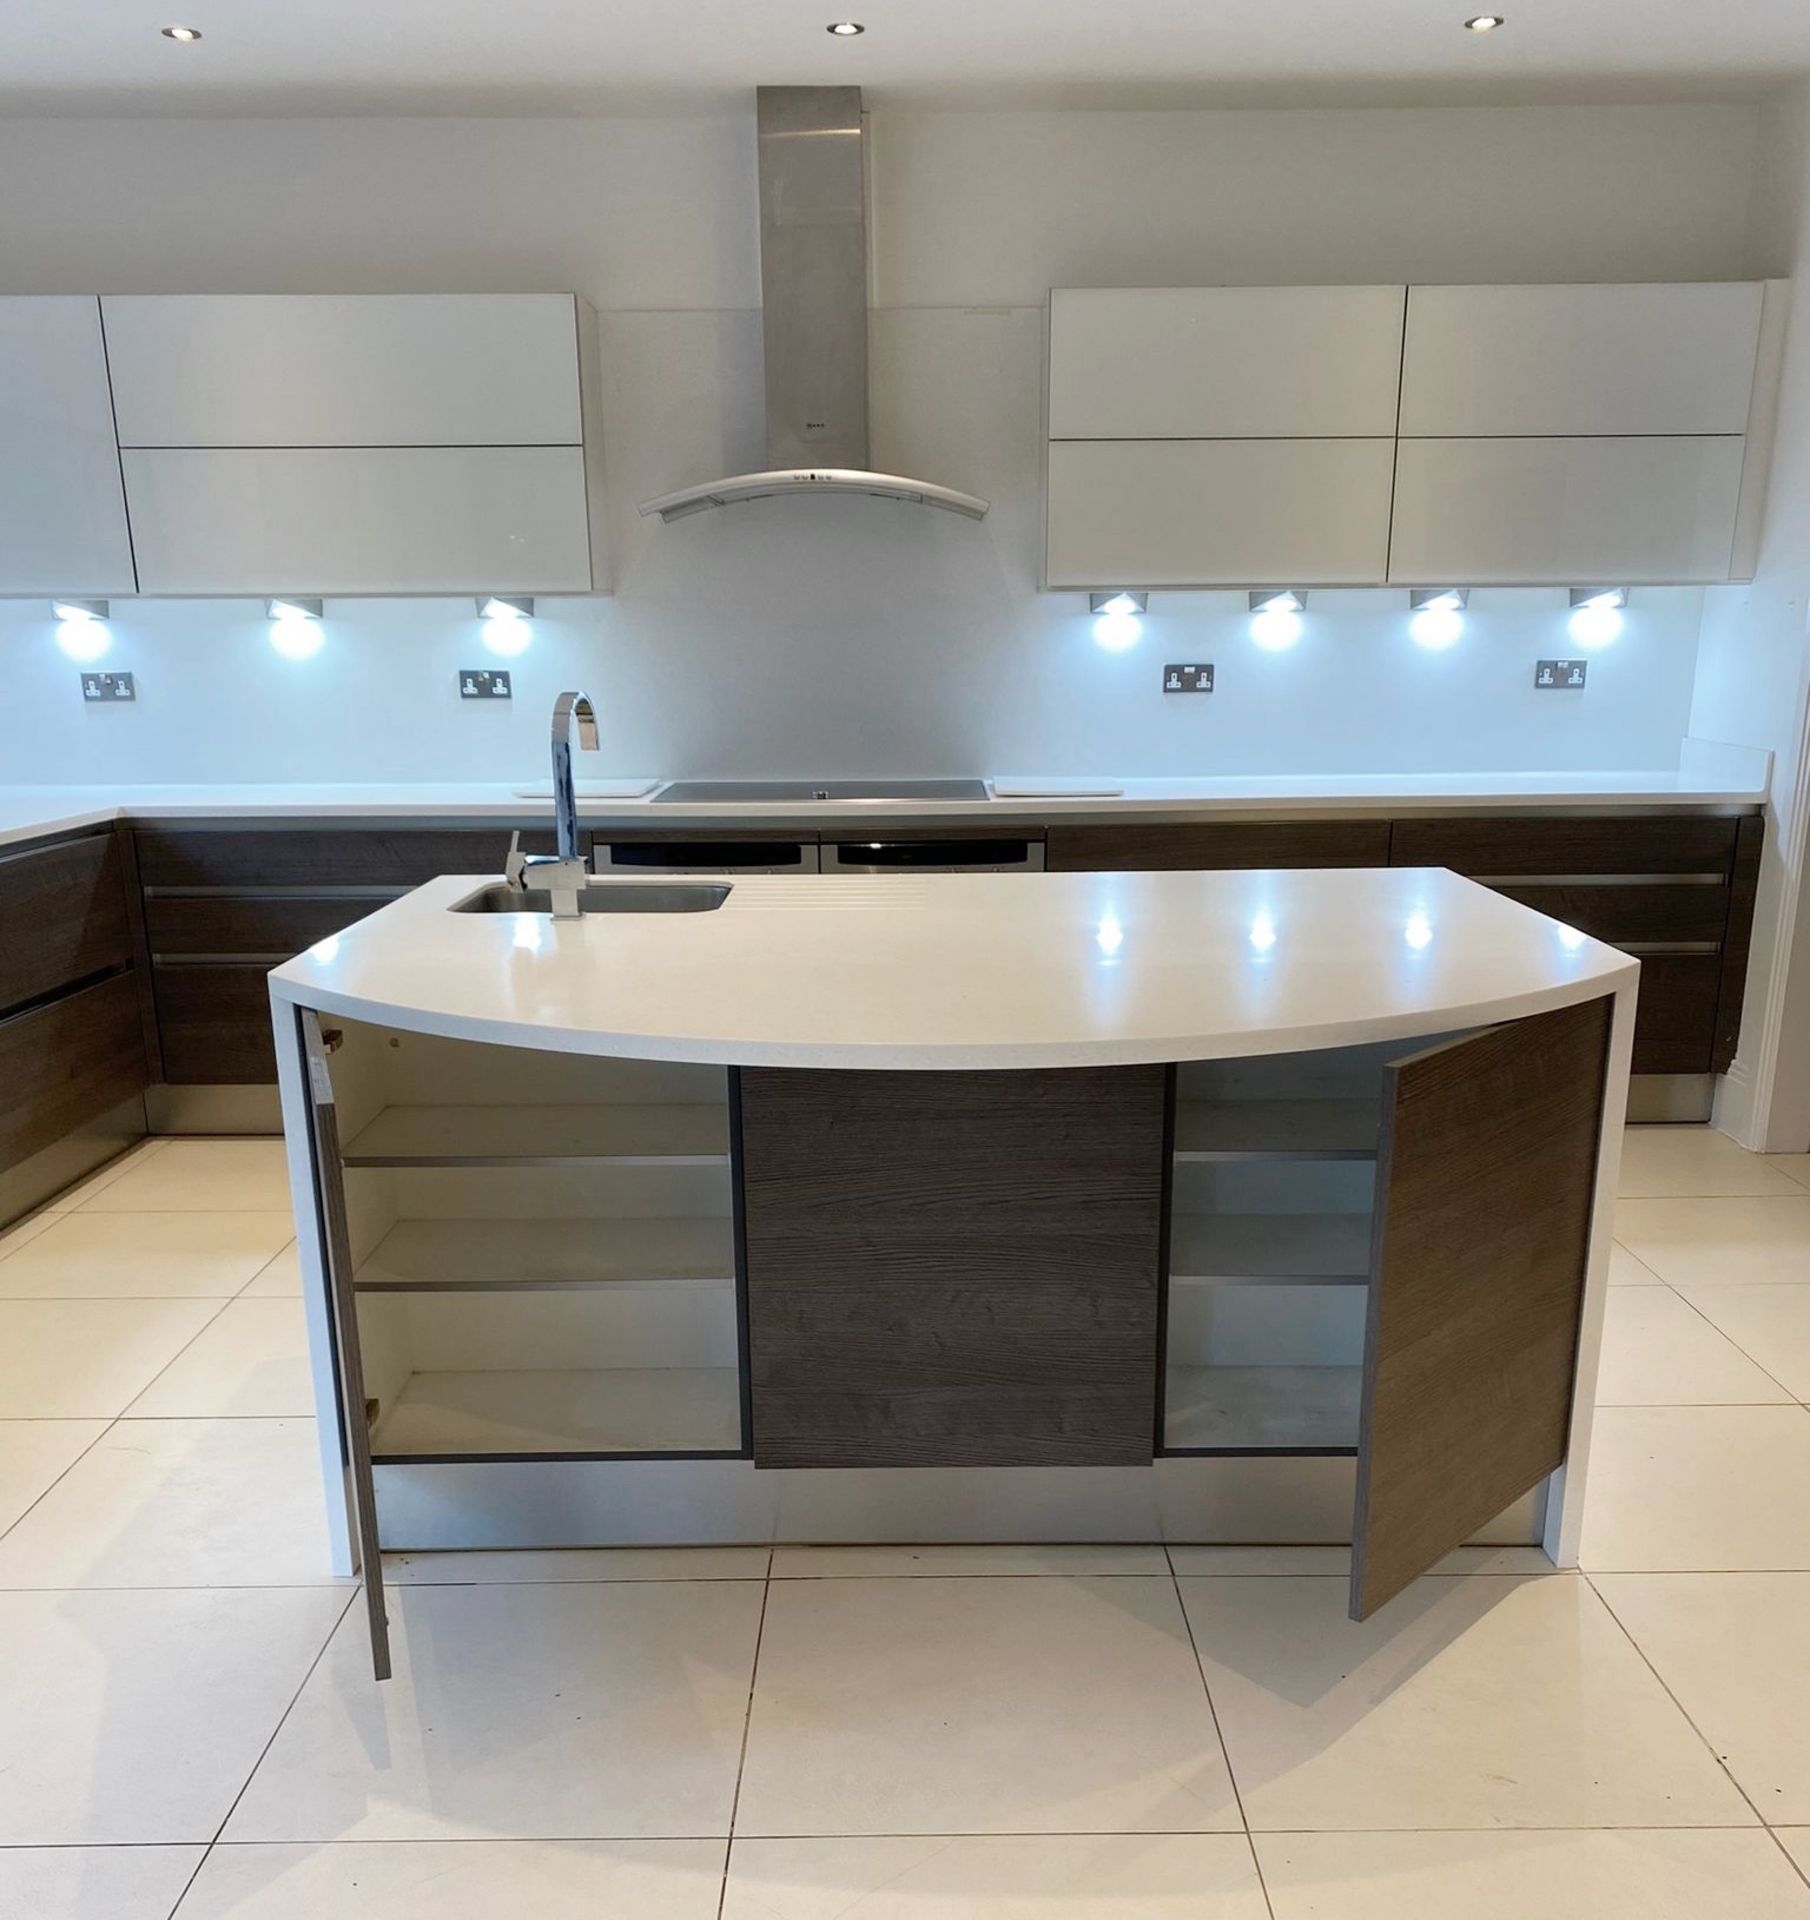 Bespoke Fitted Premium RWK German Kitchen With NEFF Appliances, Corian Worktops And Central Island - Image 7 of 30